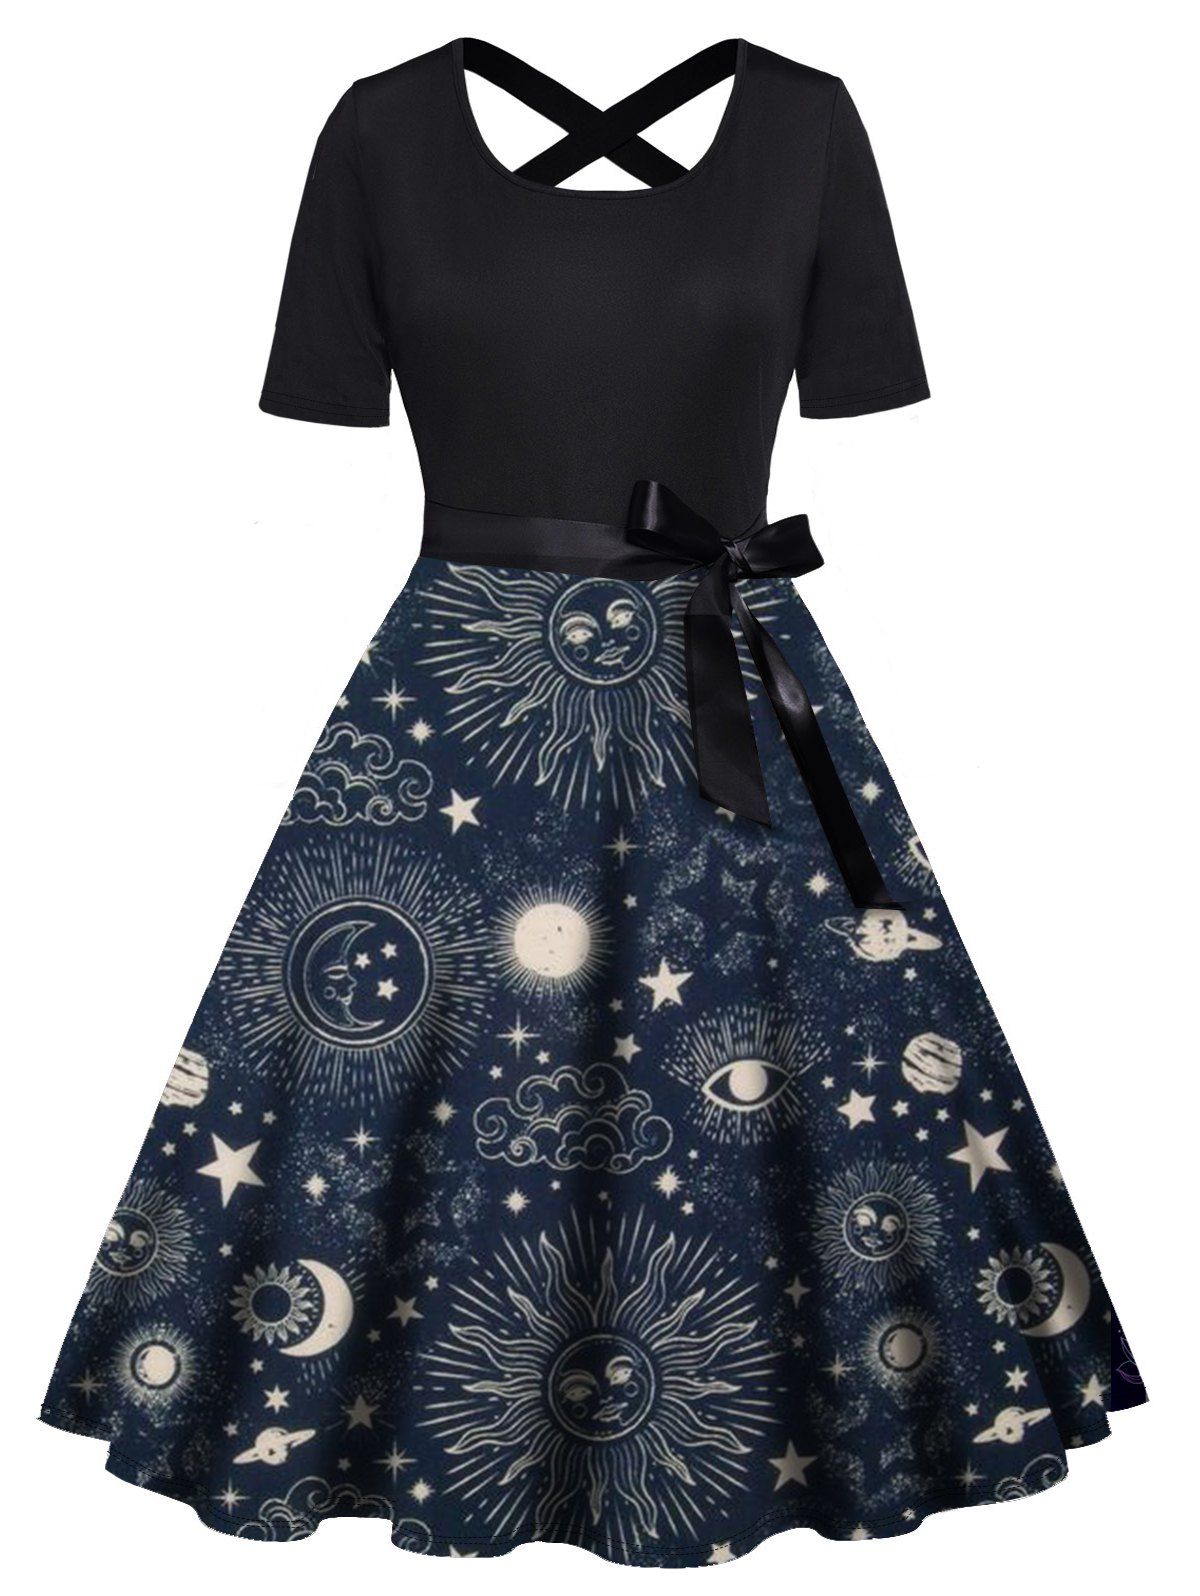 Plus Size Dress Sun Moon Star Planet Print Bowknot Belted Crossover Back High Waisted A Line Midi Dress - DEEP BLUE 2X